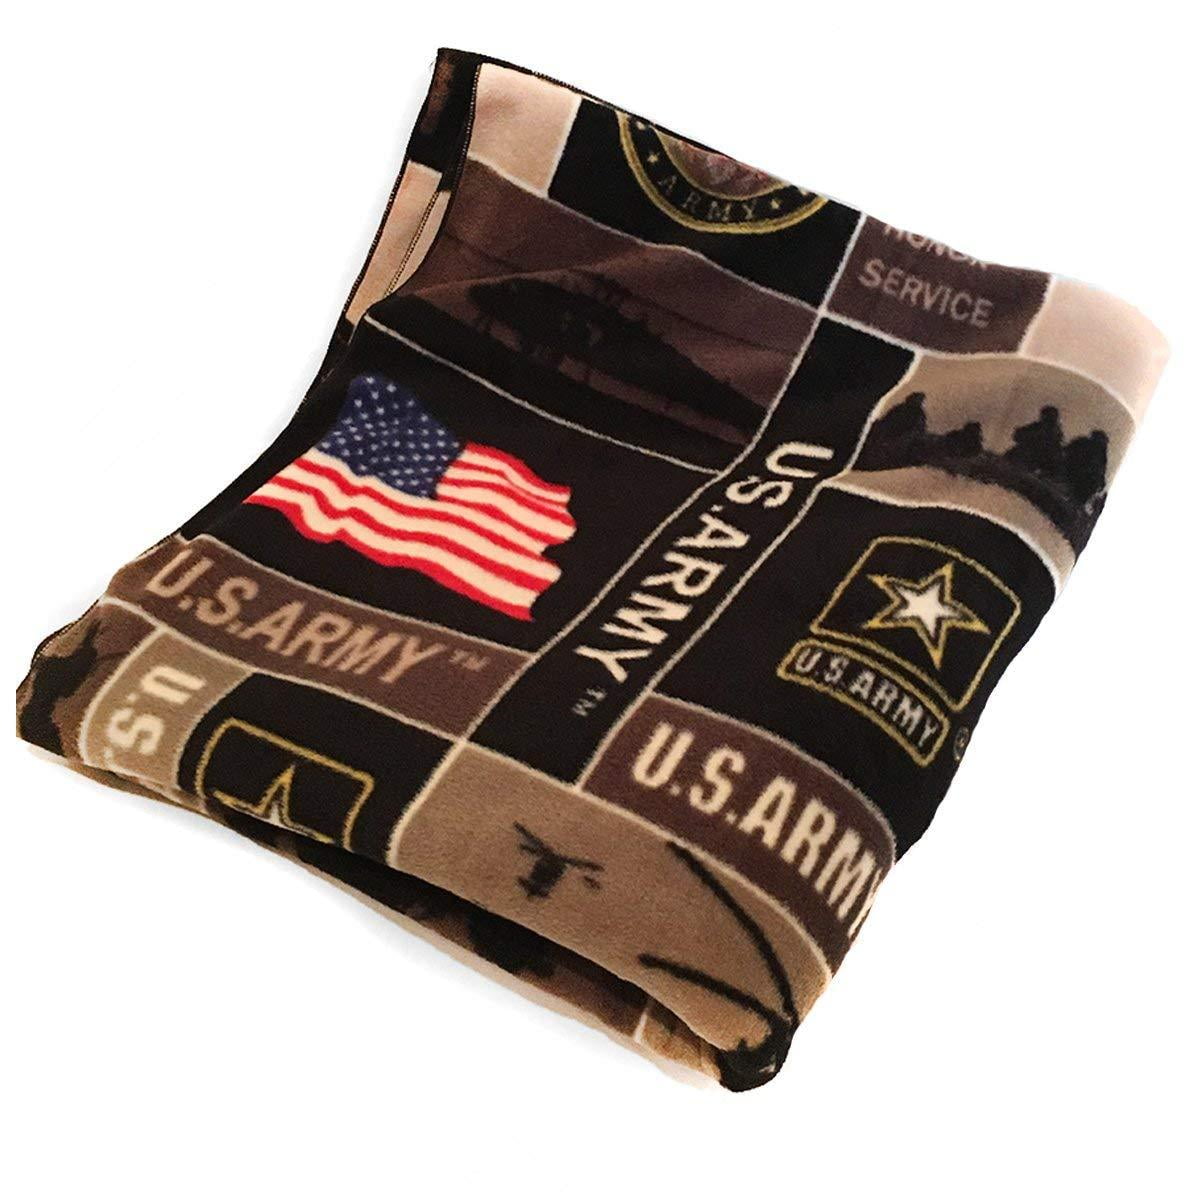 United States Army Comfy Throw Fleece Blanket w/Sleeves FREE US SHIPPING 